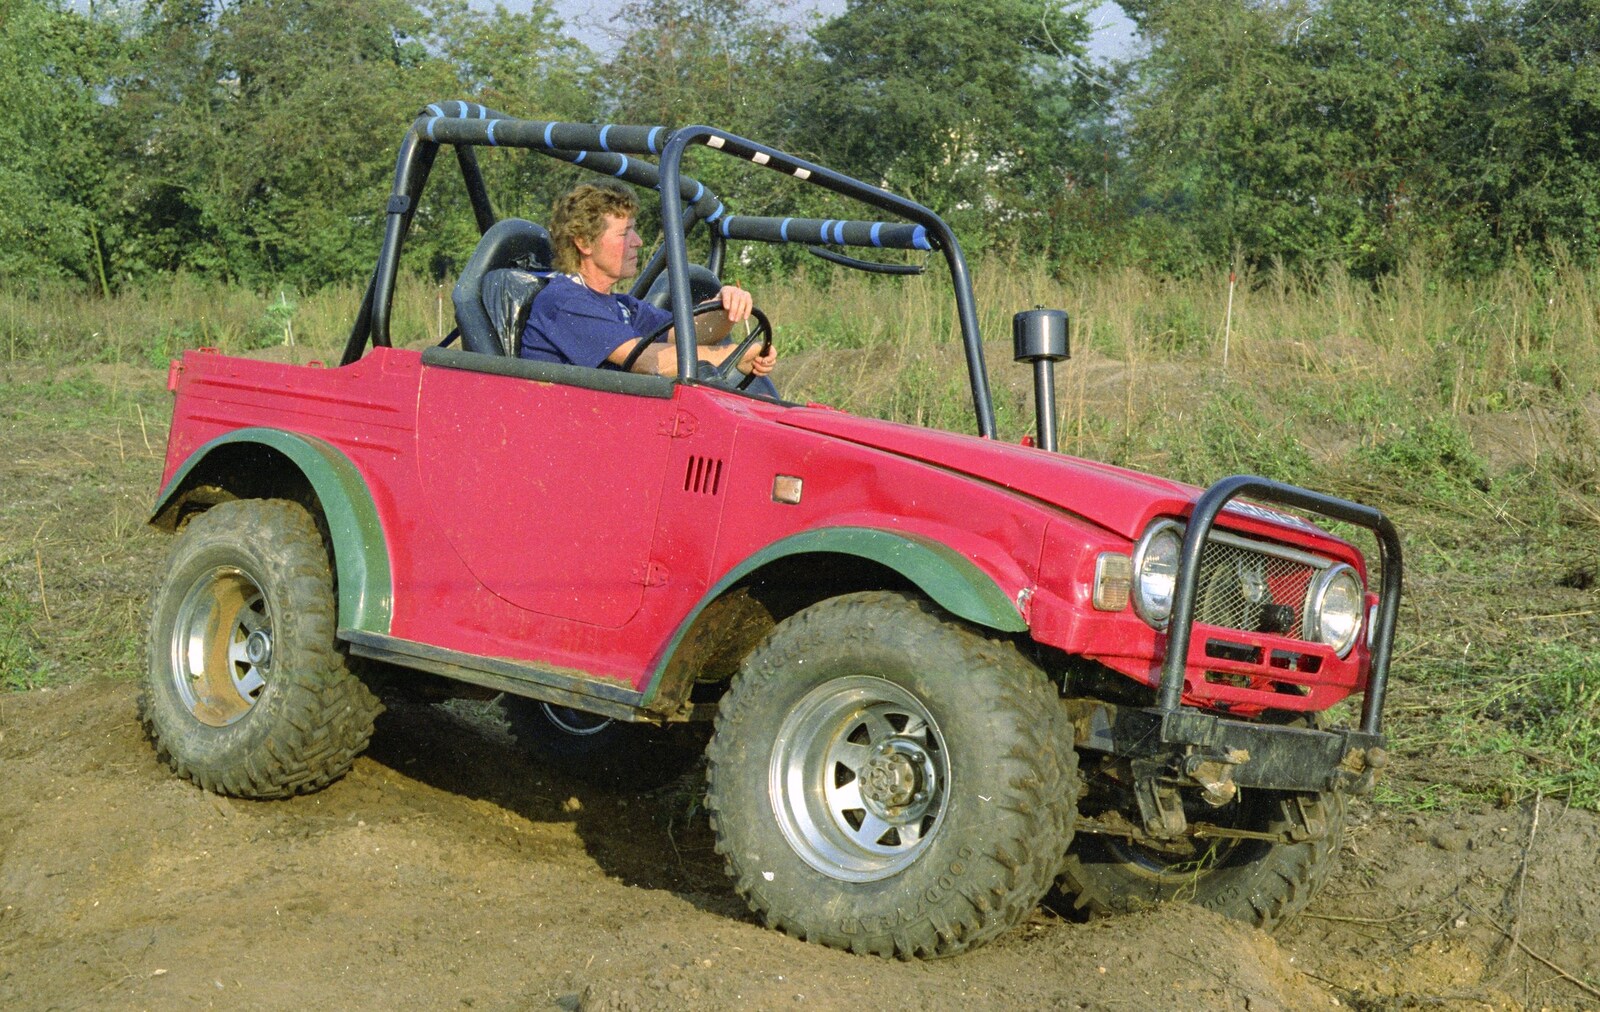 Brenda in the off-roader from Cider Making With Geoff and Brenda, Stuston, Suffolk - 10th September 1998